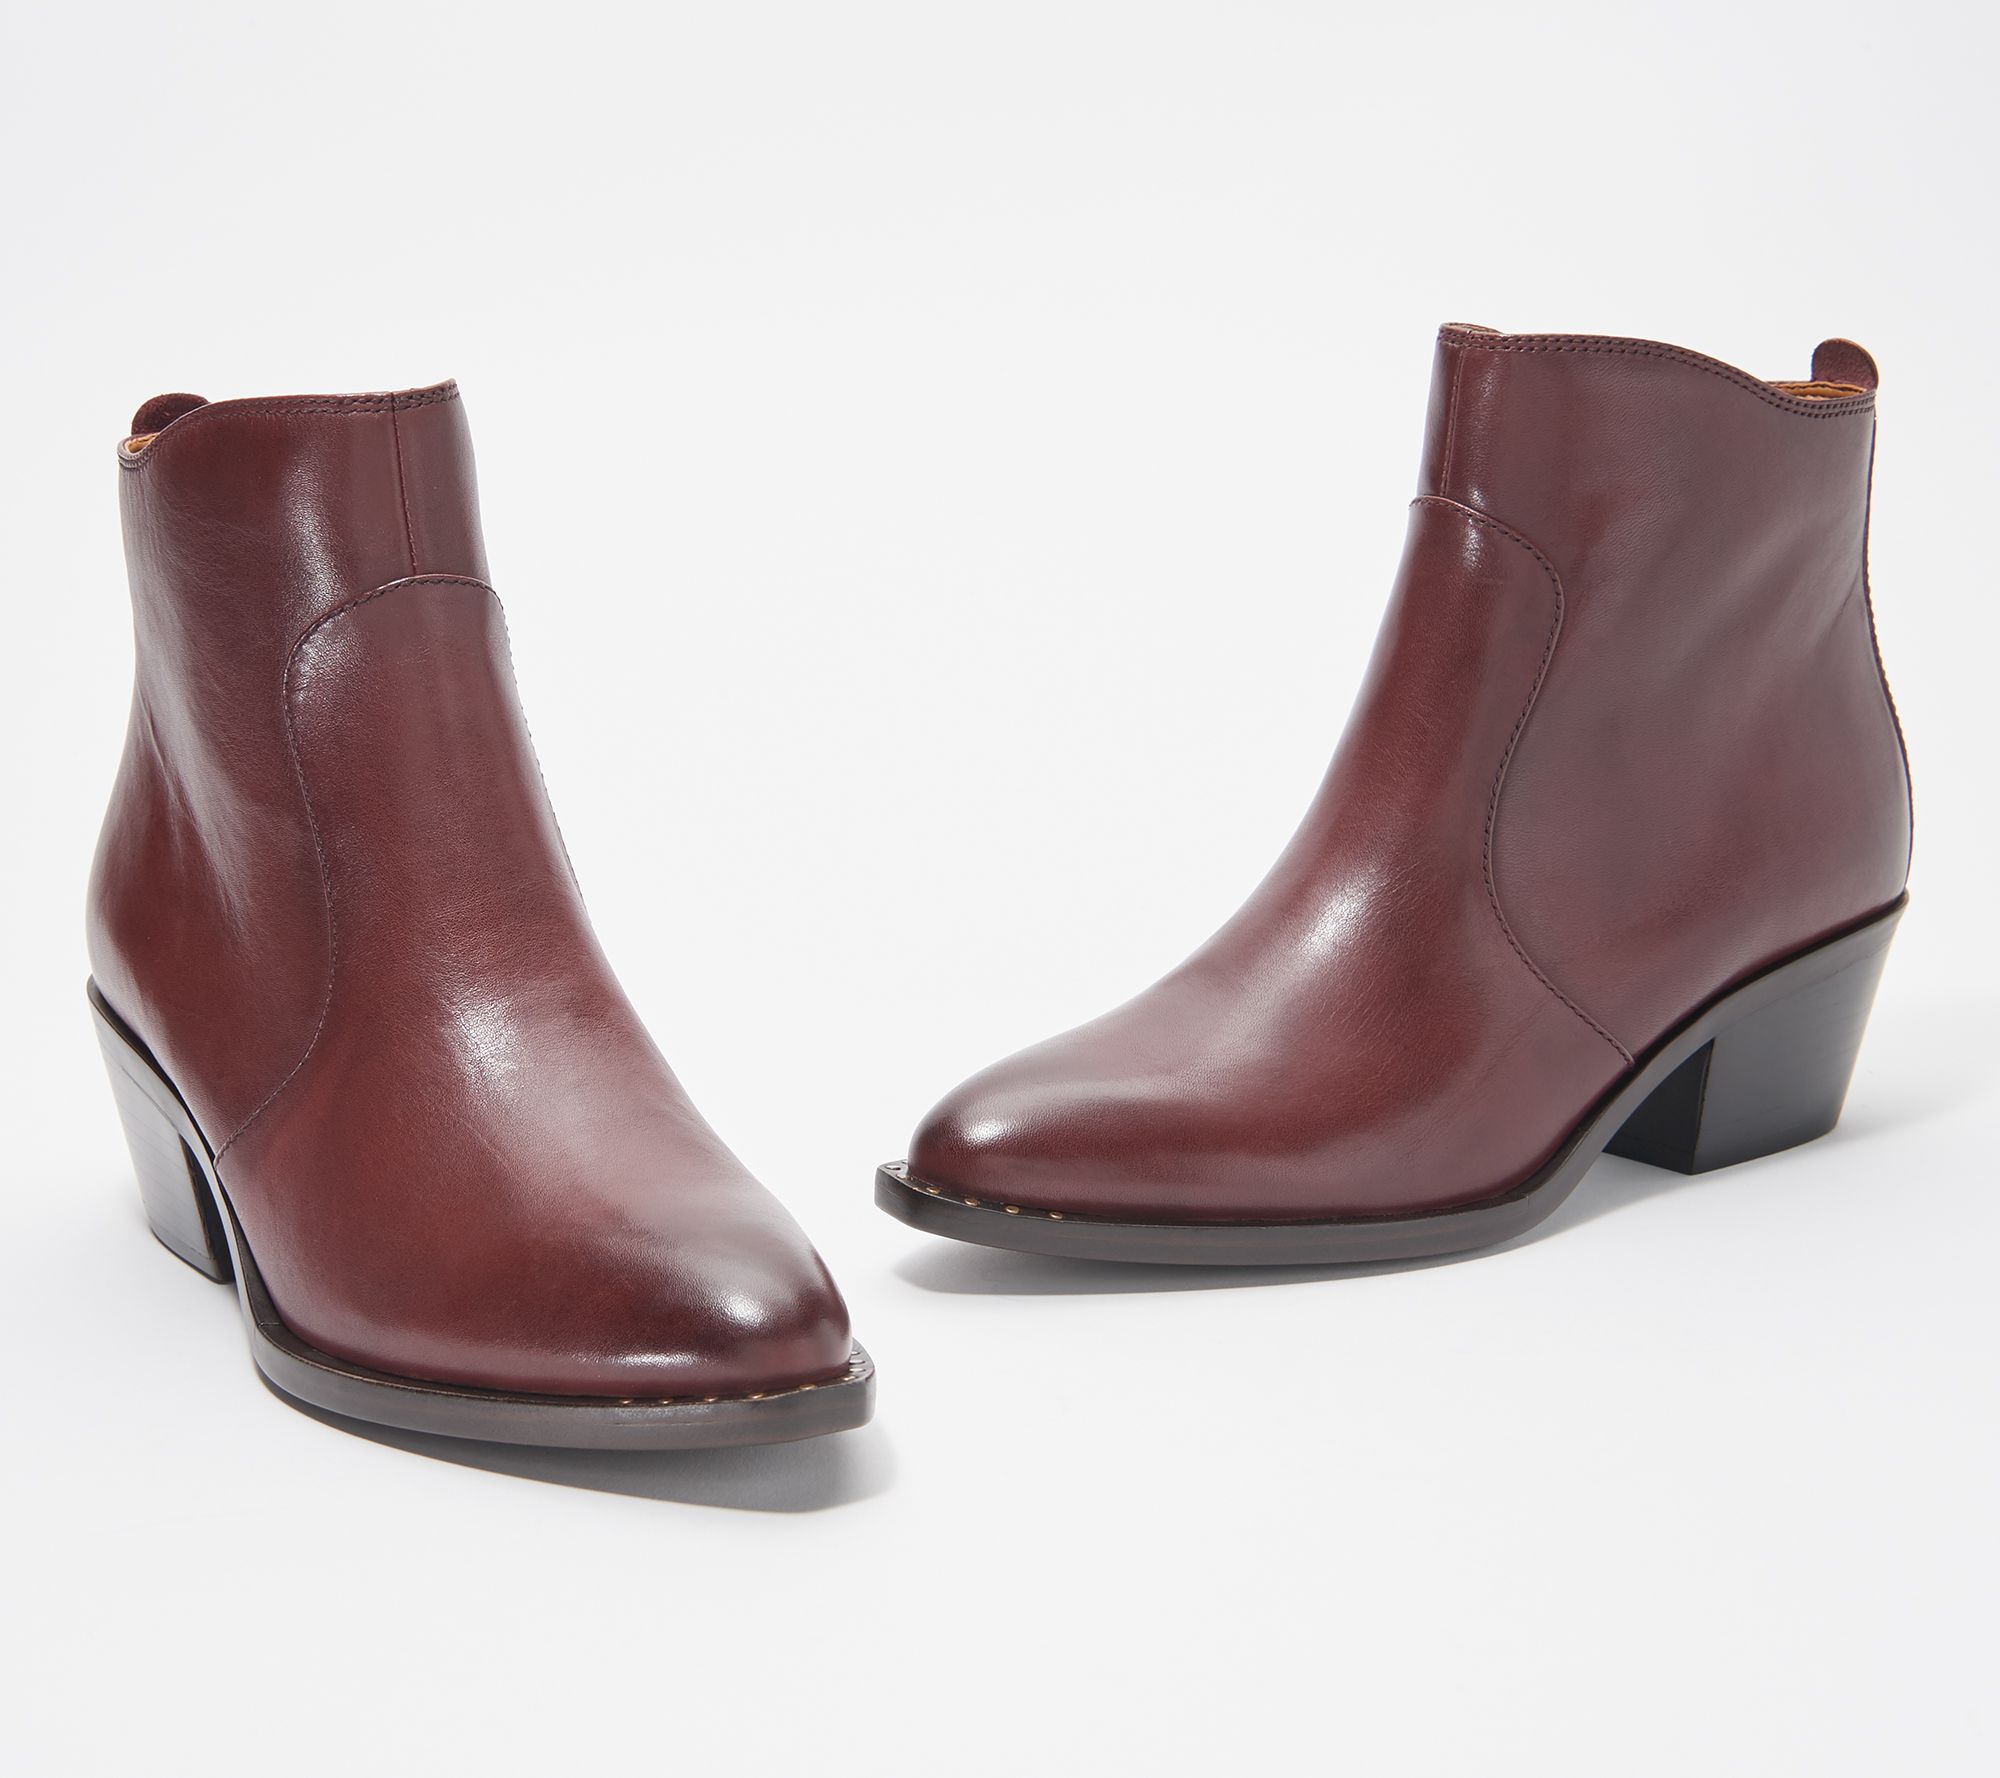 Patricia Nash Leather Ankle Boots - Suzanna - QVC.com